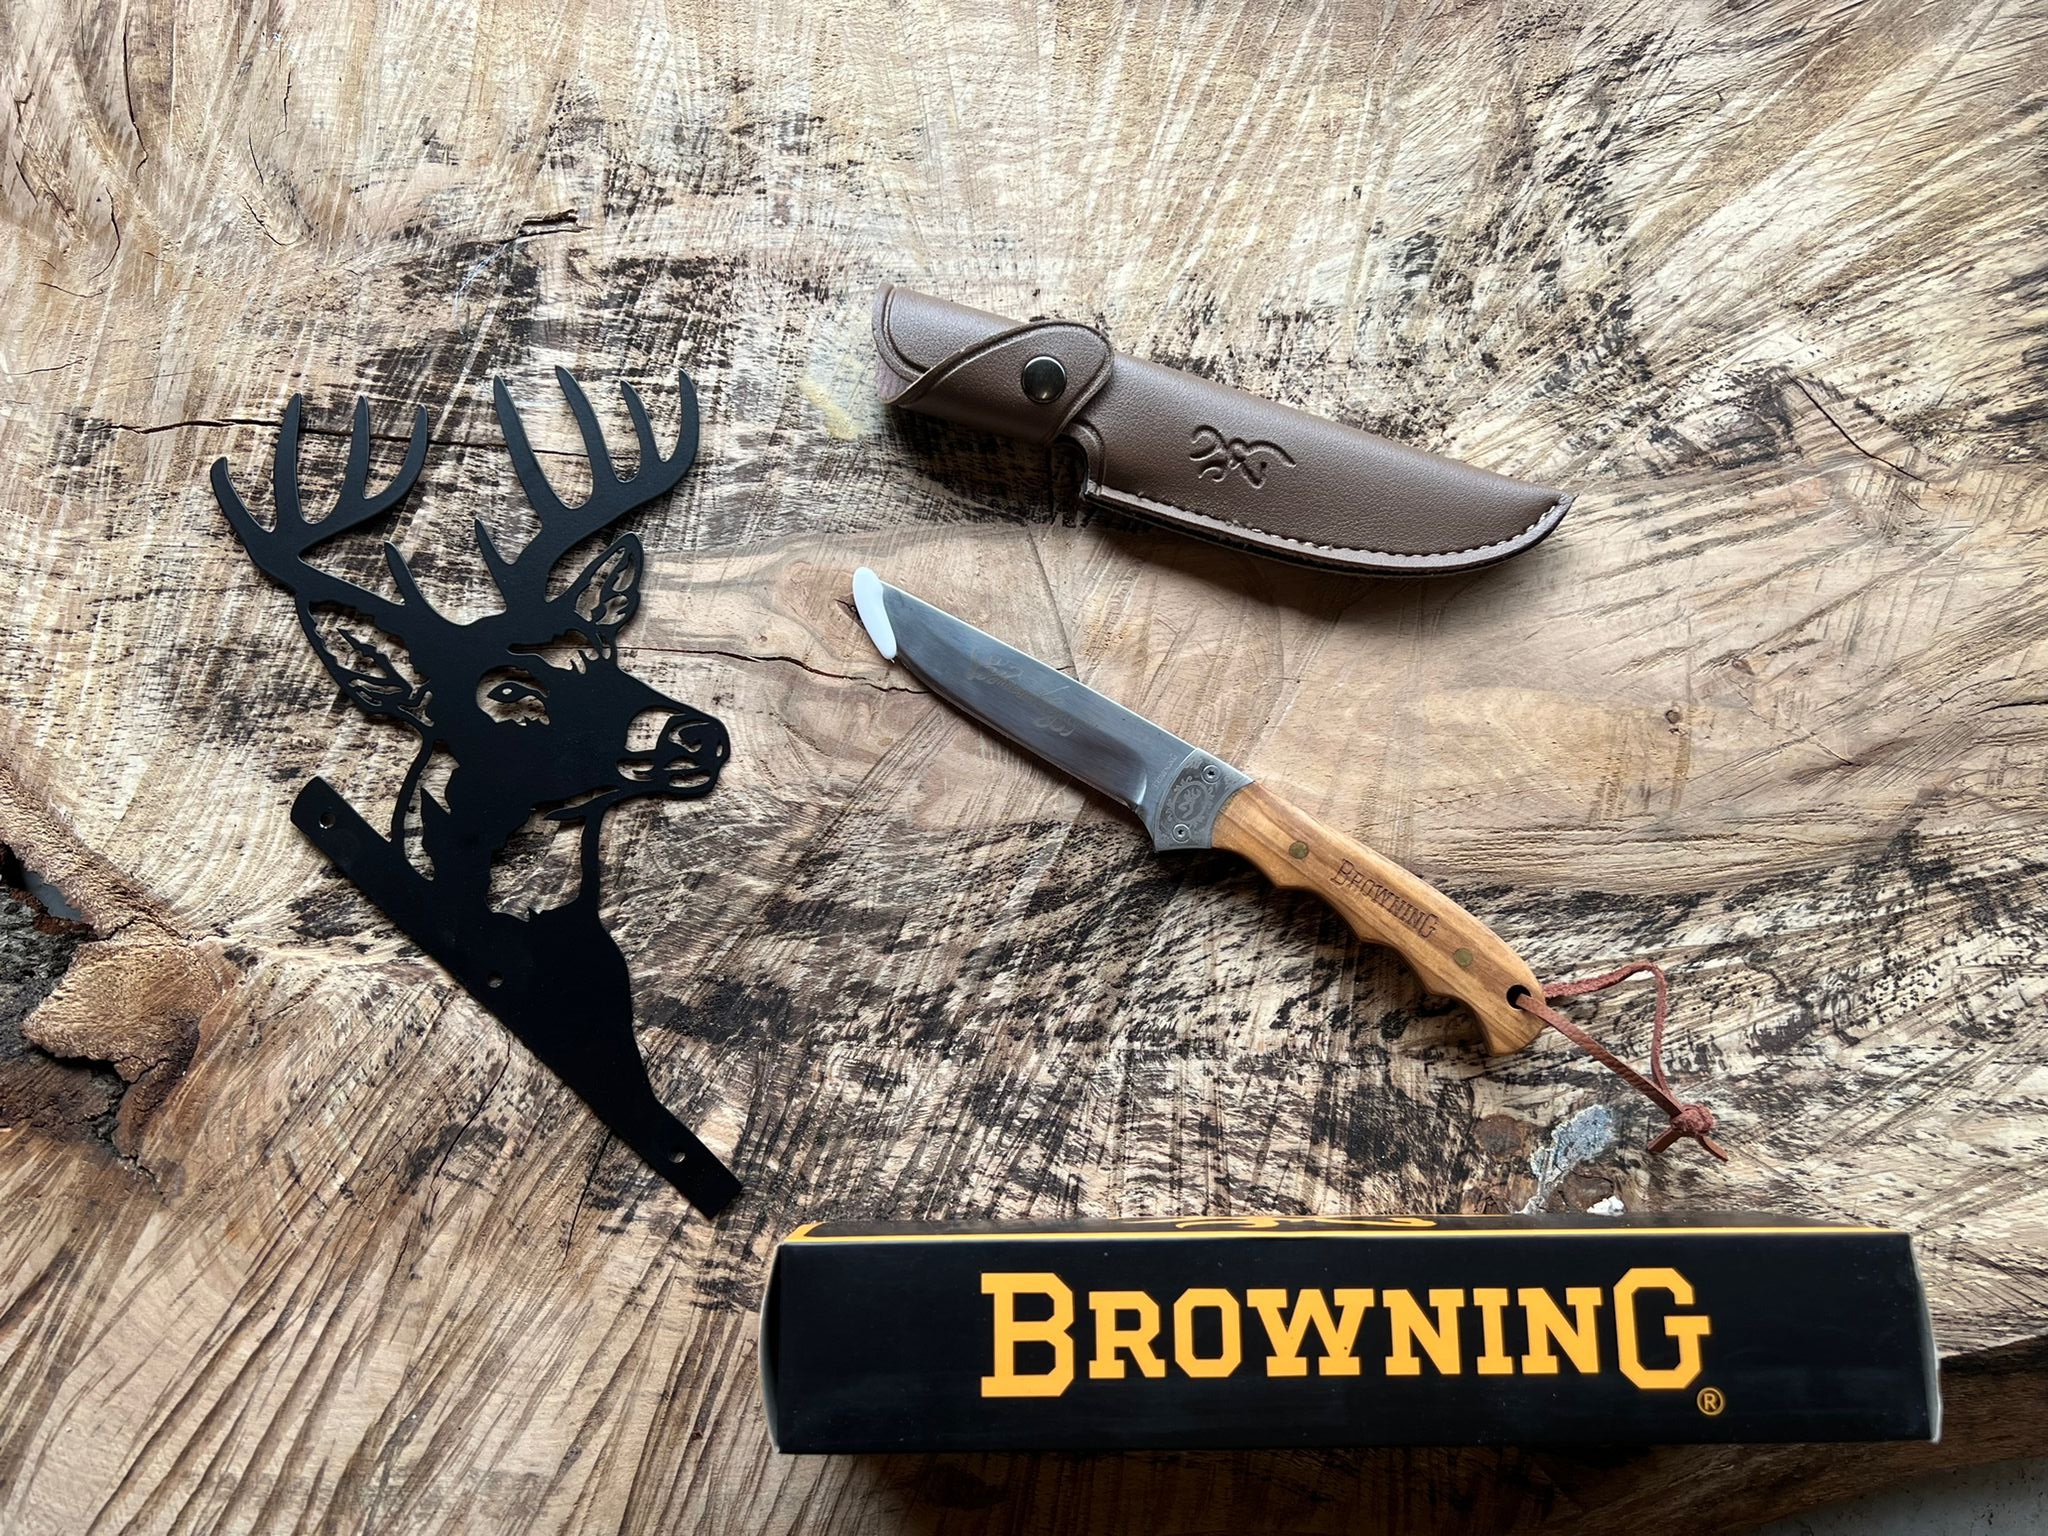 A hunting knife showcased against a backdrop of rugged wilderness.